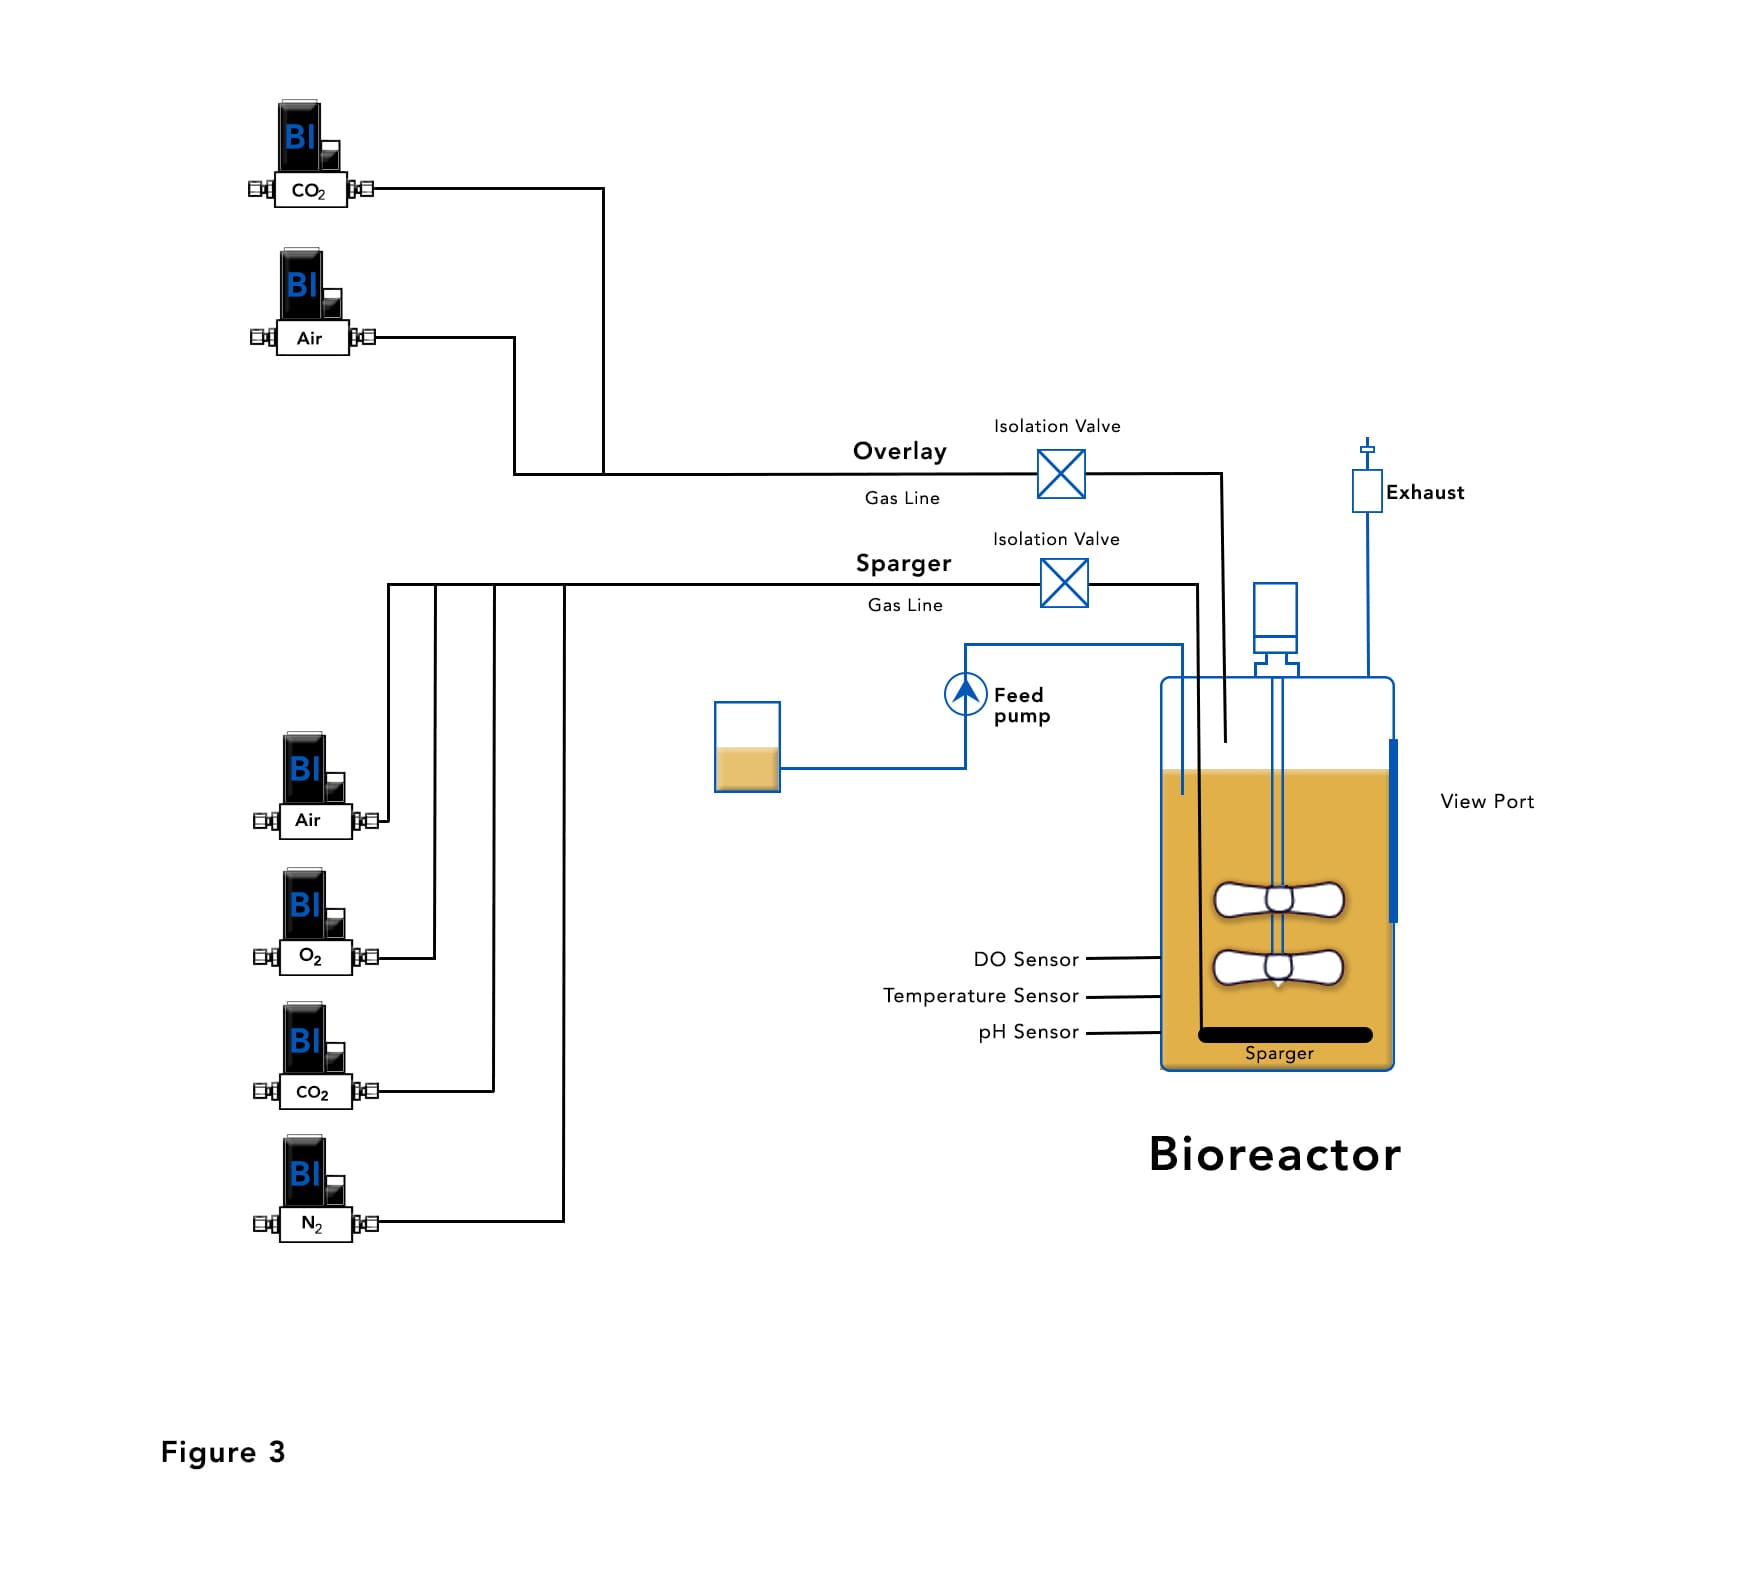 Bioreactor with Mass Flow Controllers